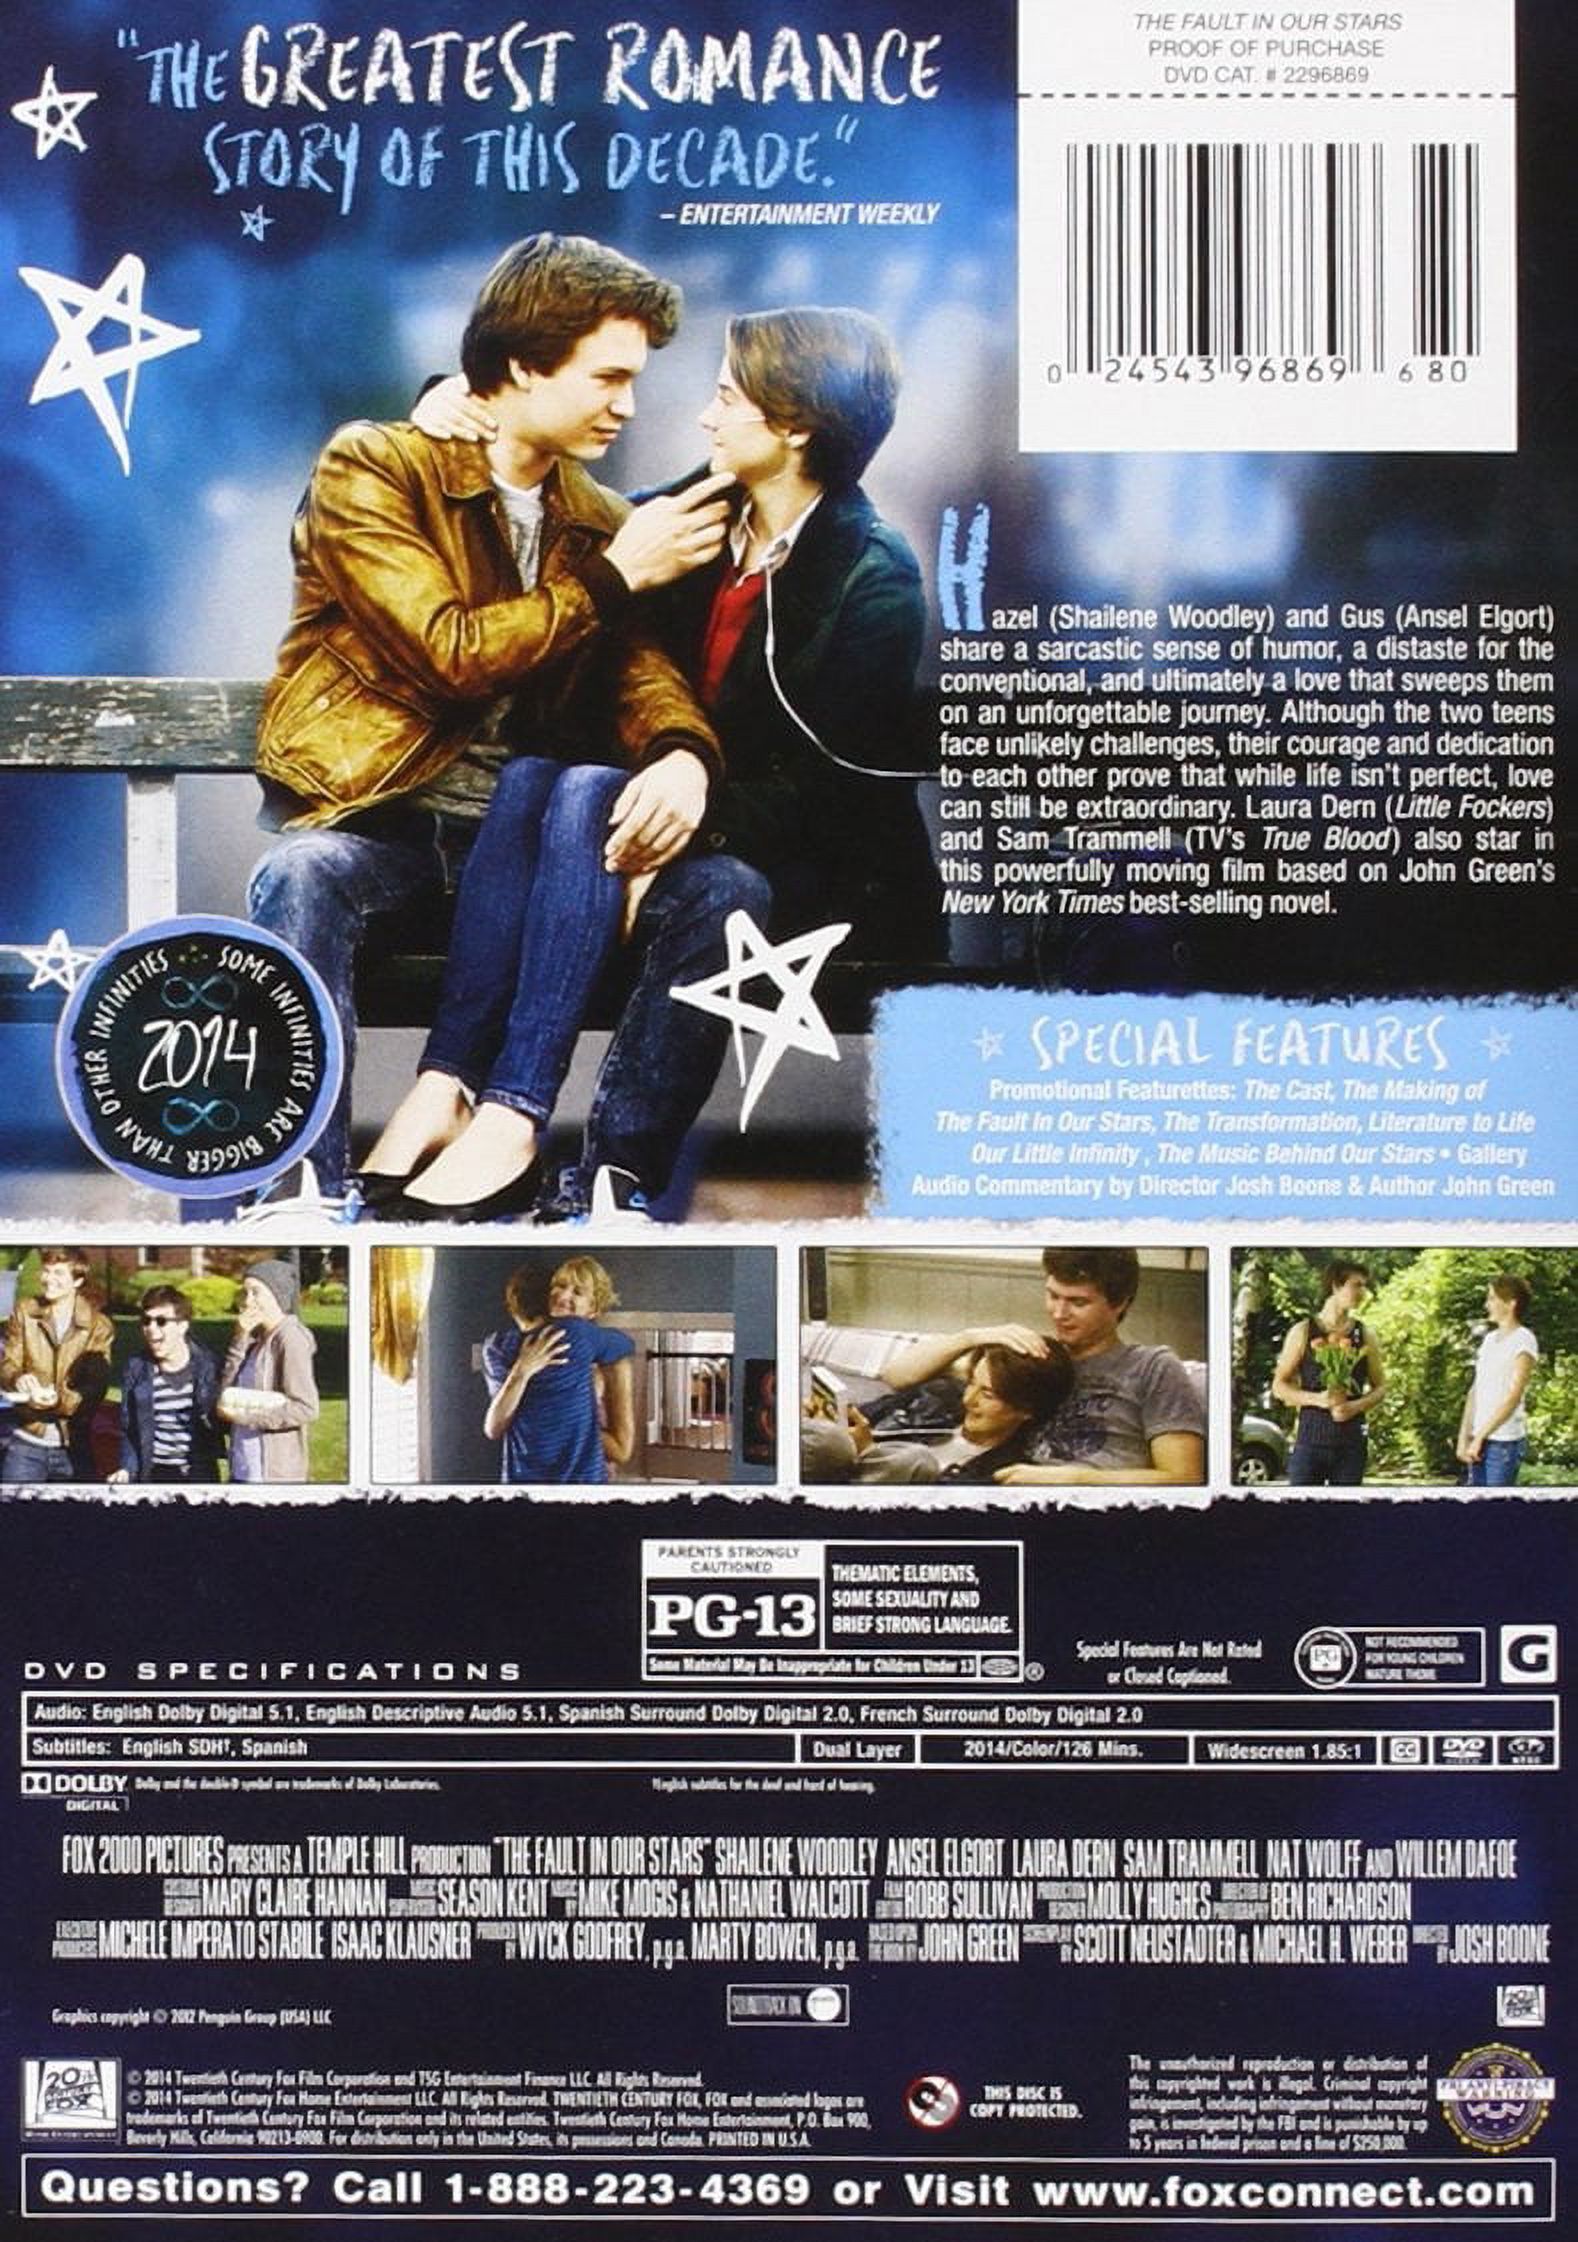 The Fault in Our Stars (DVD), 20th Century Studios, Drama - image 2 of 2